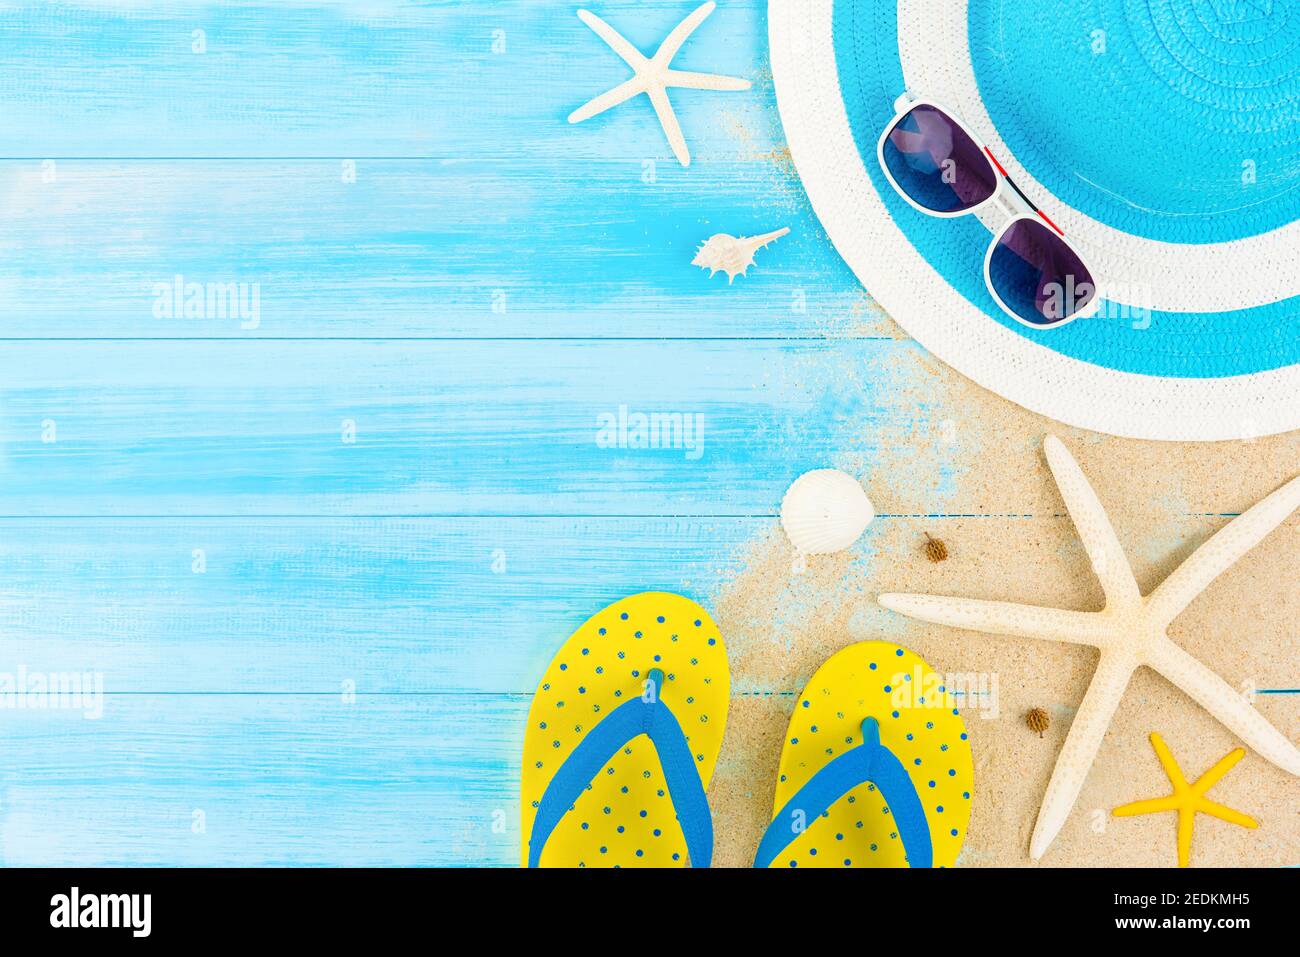 Colorful summer holiday beach background with accessories on light blue ...